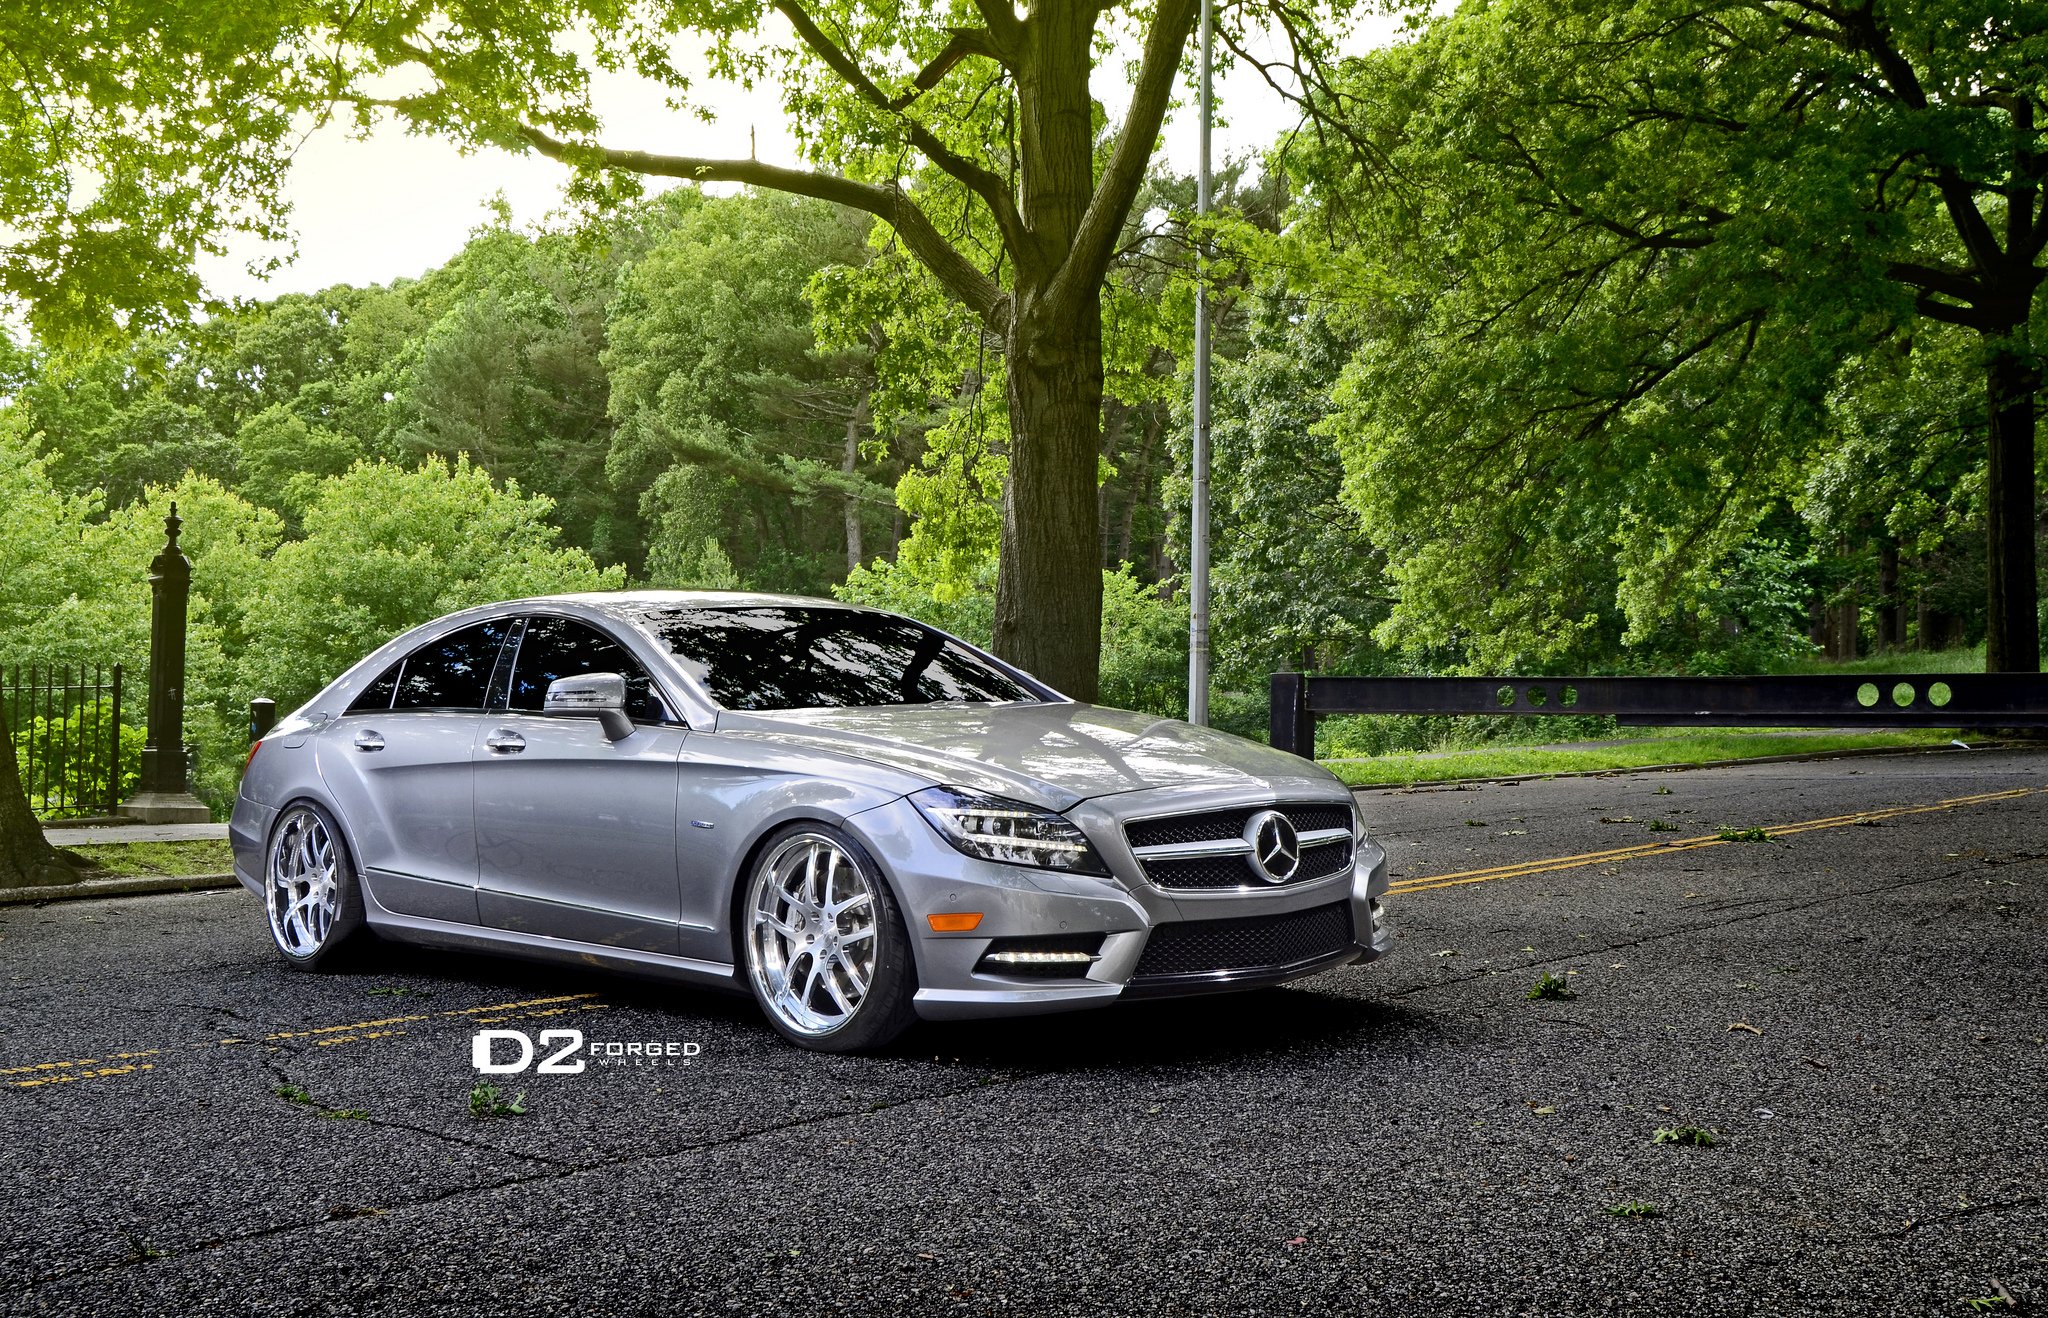 d2forged, Wheels, Tuning, Cars, Mercedes, Cls Wallpaper